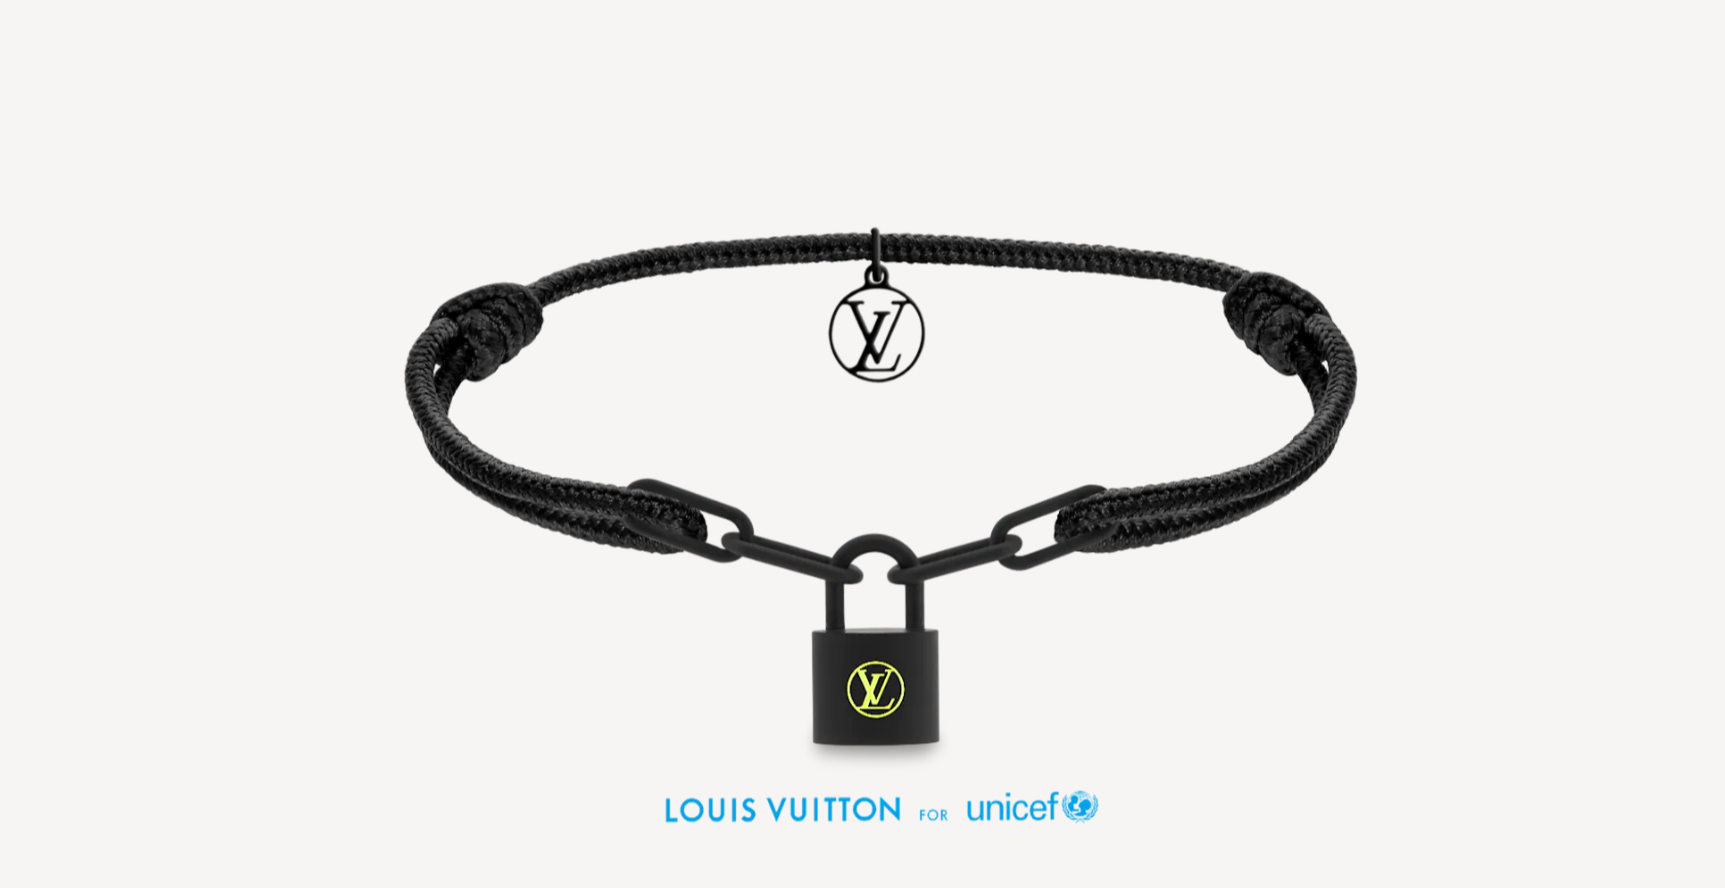 Louis Vuitton And UNICEF Launch New Campaign #MAKEAPROMISE